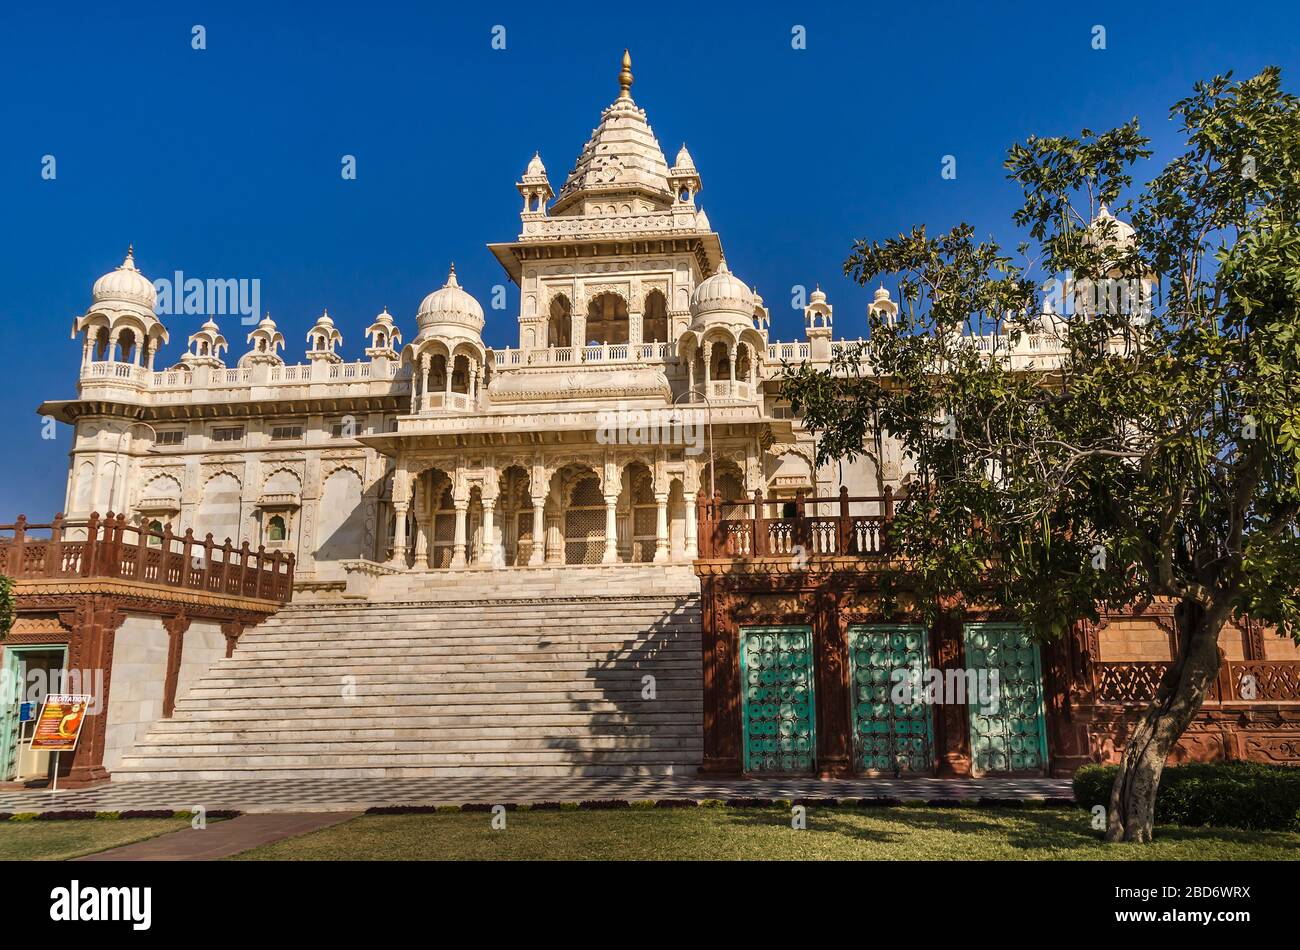 JODHPUR, INDIA – DEC. 02, 2019: Famous Jaswant Thada Mausoleum in Rajasthan, a white marble memorial Commonly known as Taj Mahal of Mewar. Stock Photo